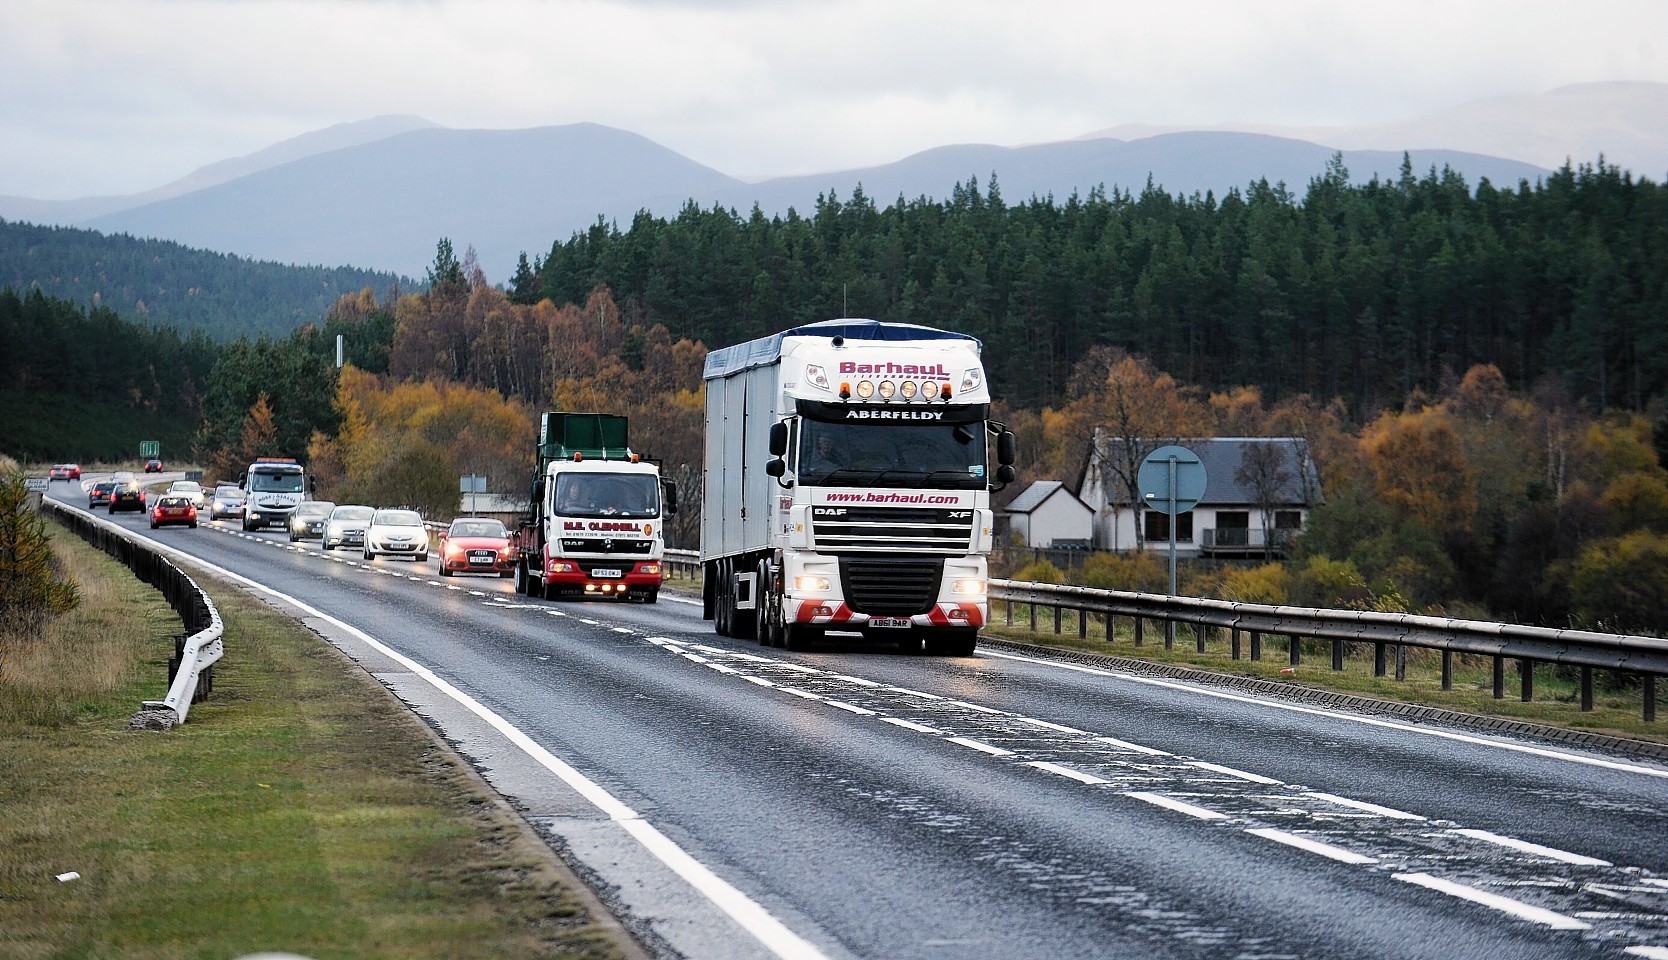 74 people have been killed on the A9 between Dunblane and Thurso in the last six years